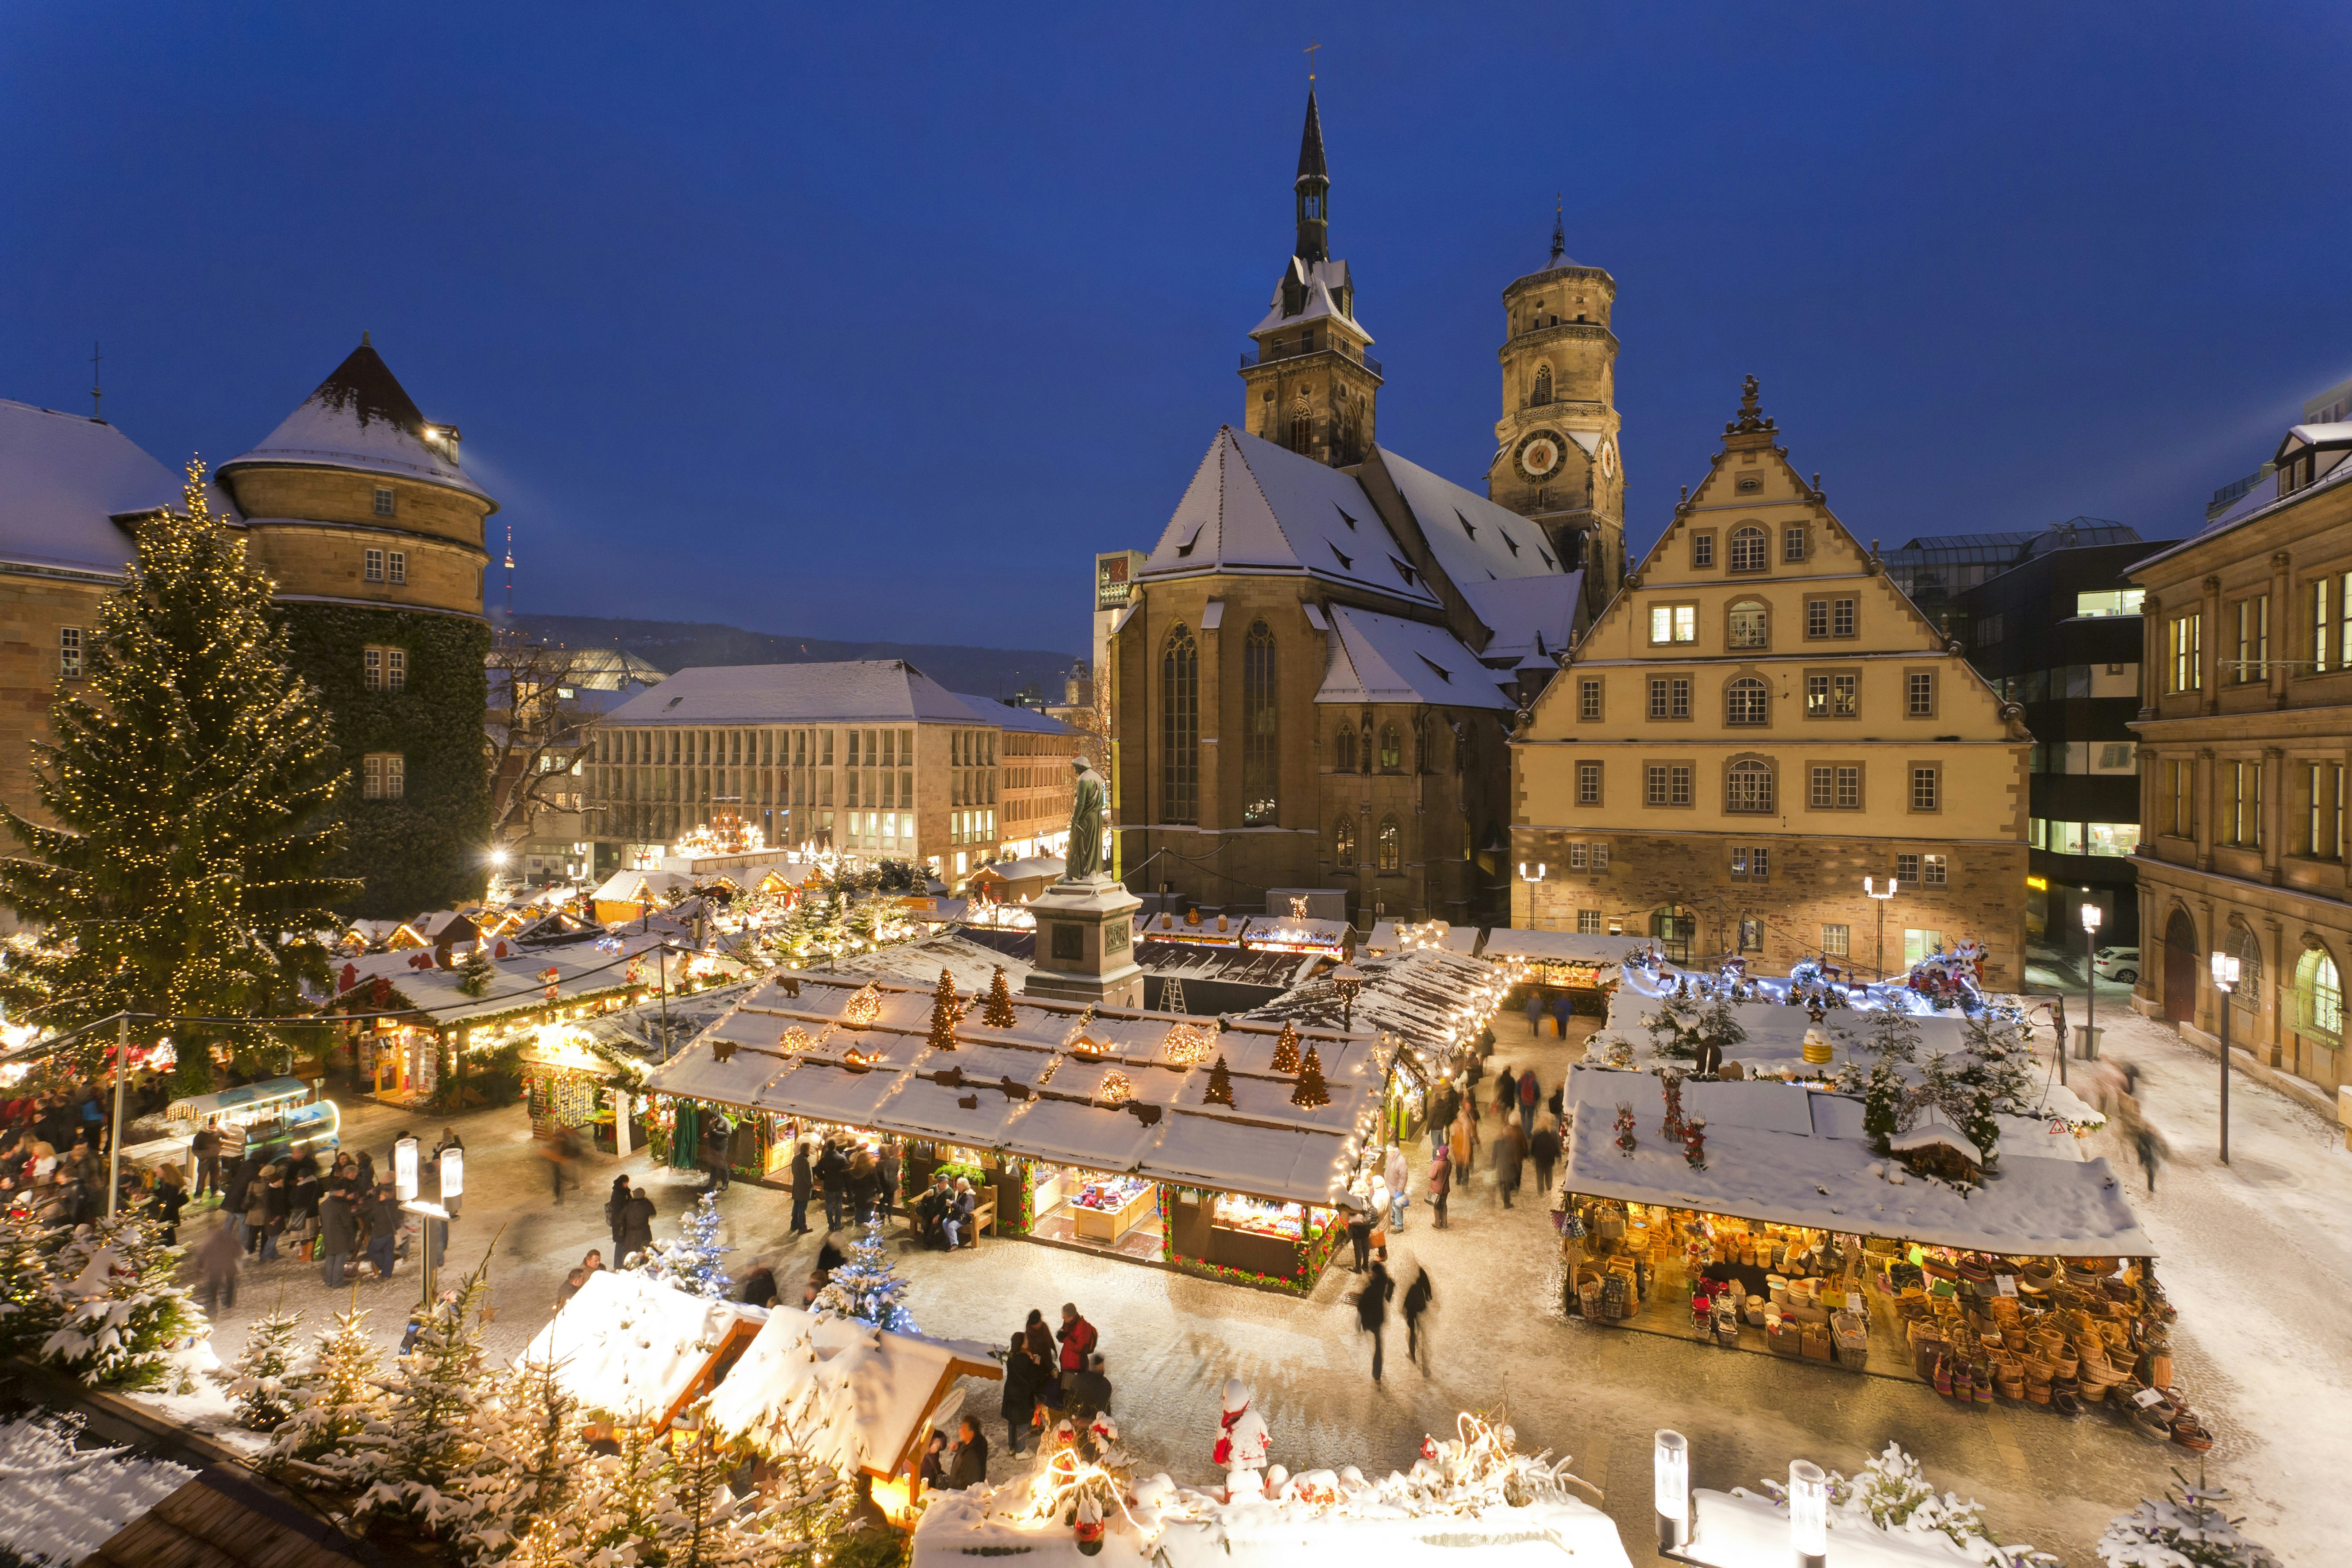 A snowy nighttime scene of a Christmas Market in a pretty medieval town square. A tree has been dressed with fairy lights and visitors walk between the many wooden stalls.